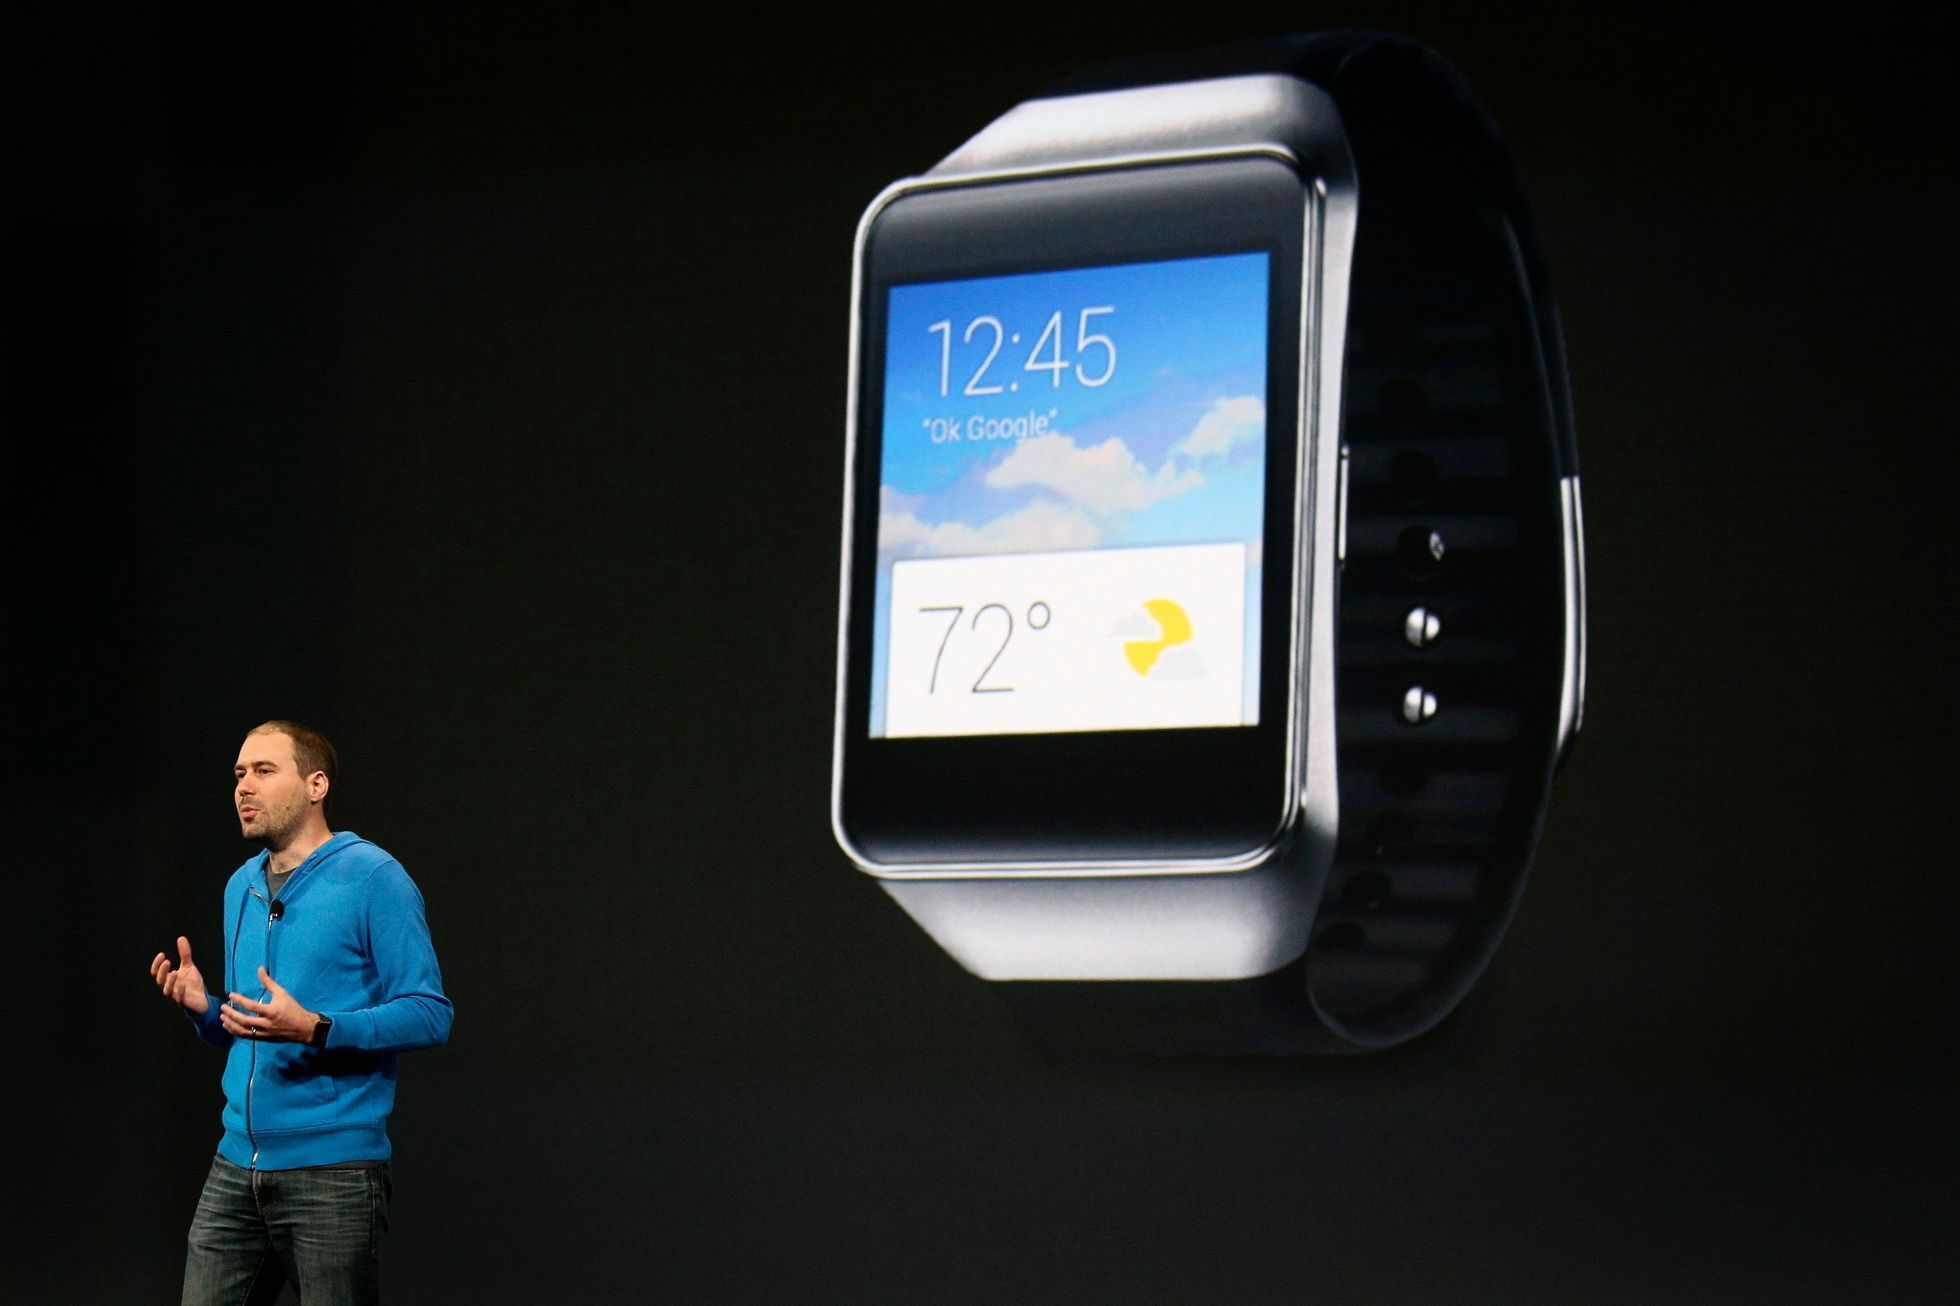 David Singleton announces a new Samsung Android Wear smartwatch at the Google I/O developers conference in San Francisco